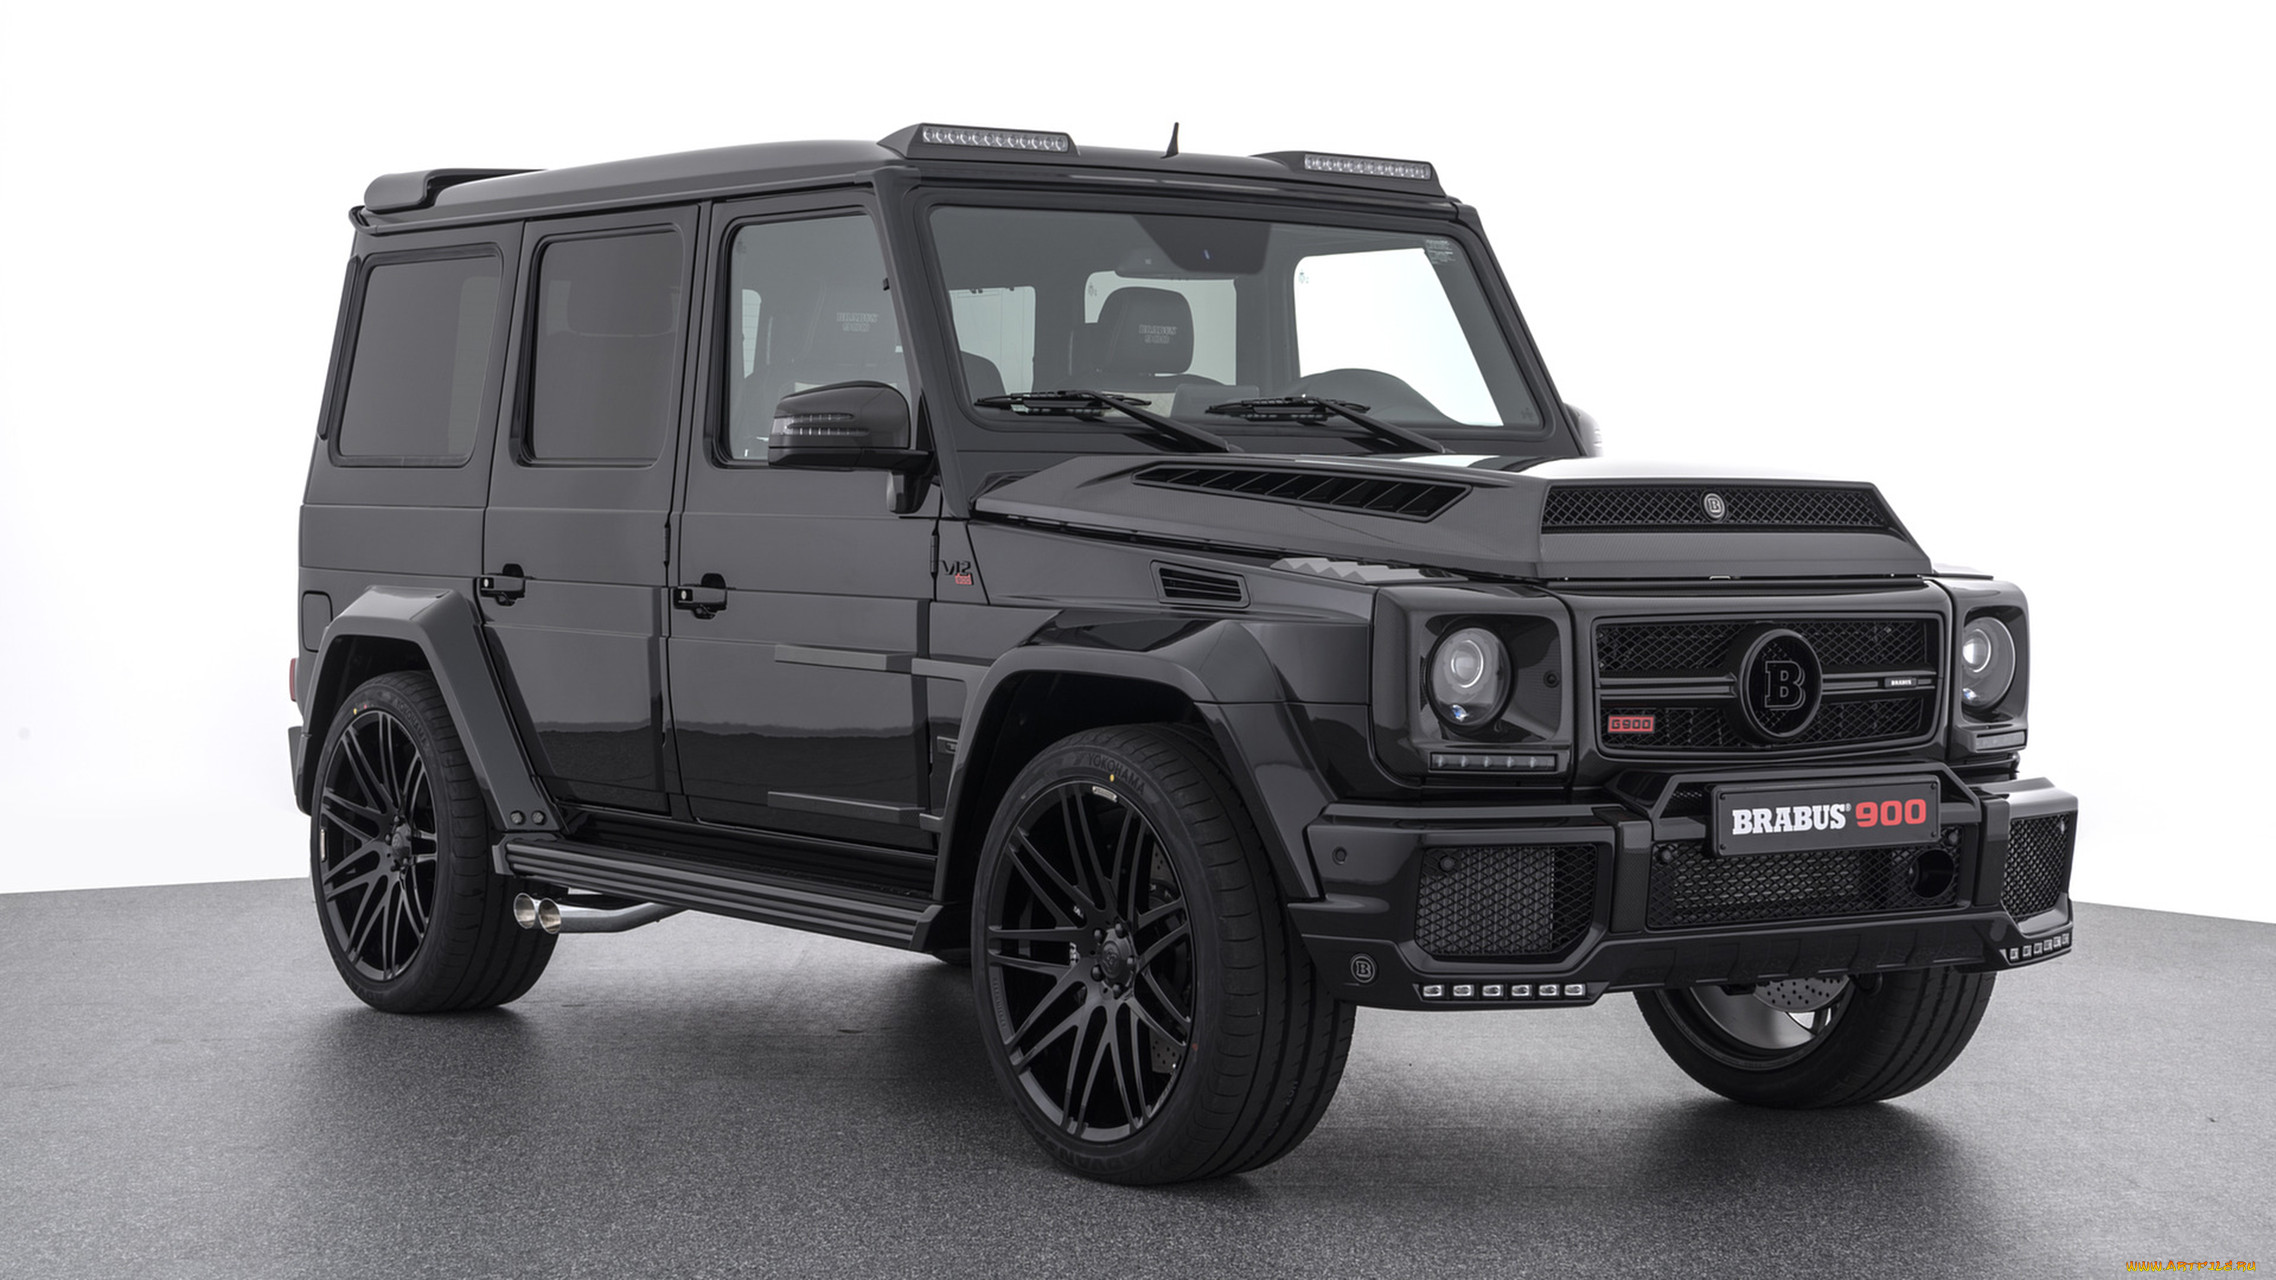 brabus 900 one of ten based on mercedes-benz amg g-65 2018, , brabus, 2018, g-65, amg, mercedes-benz, based, ten, one, 900